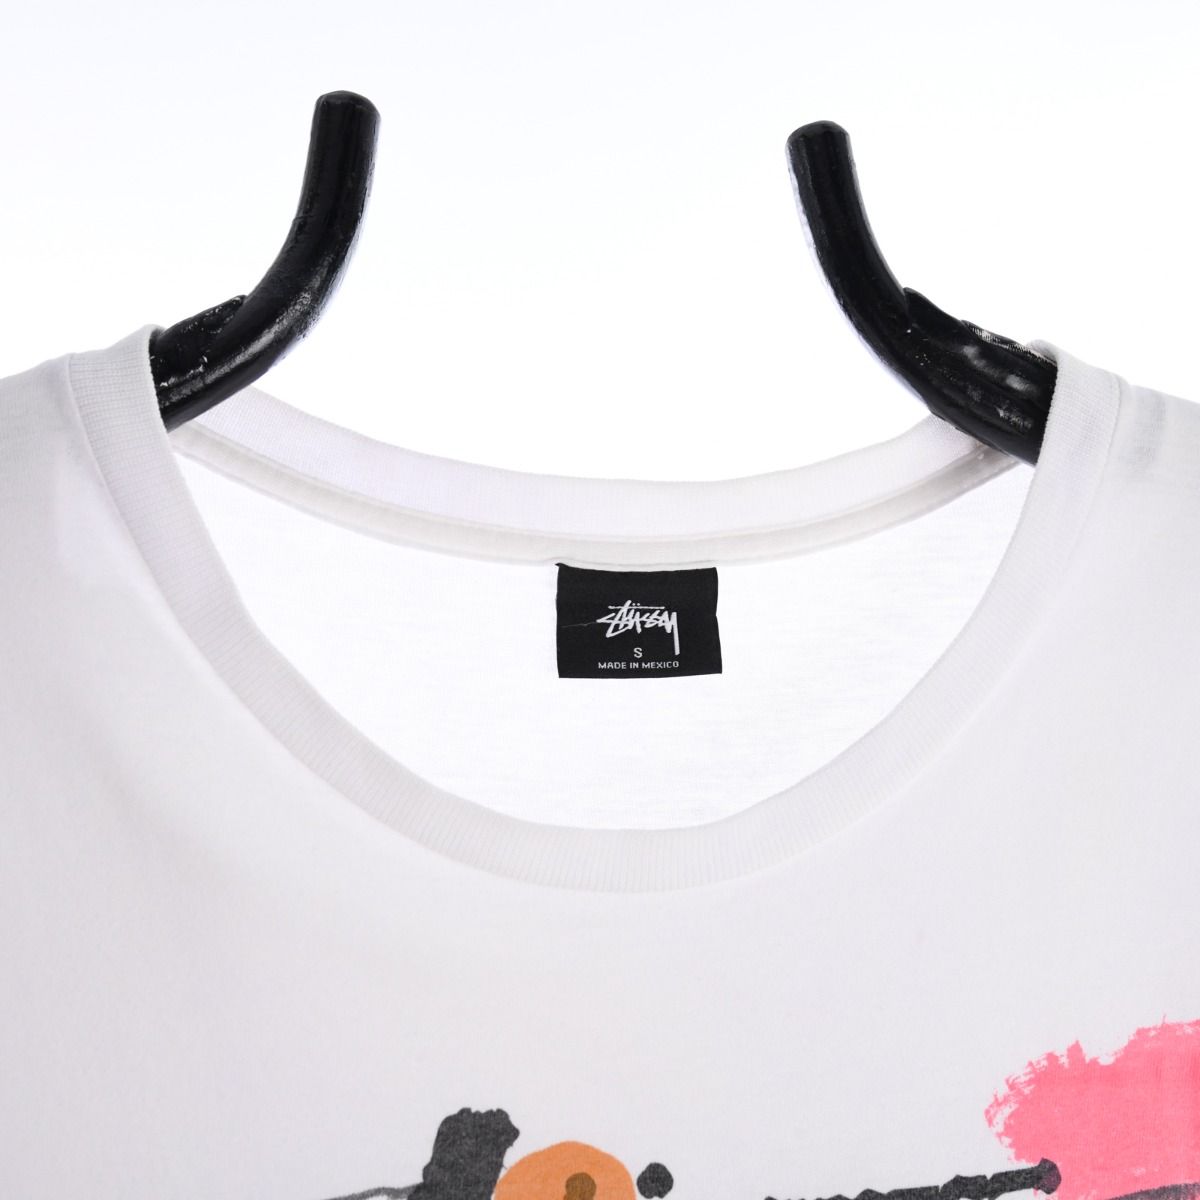 Stussy White T-Shirt With Messy Print Designs